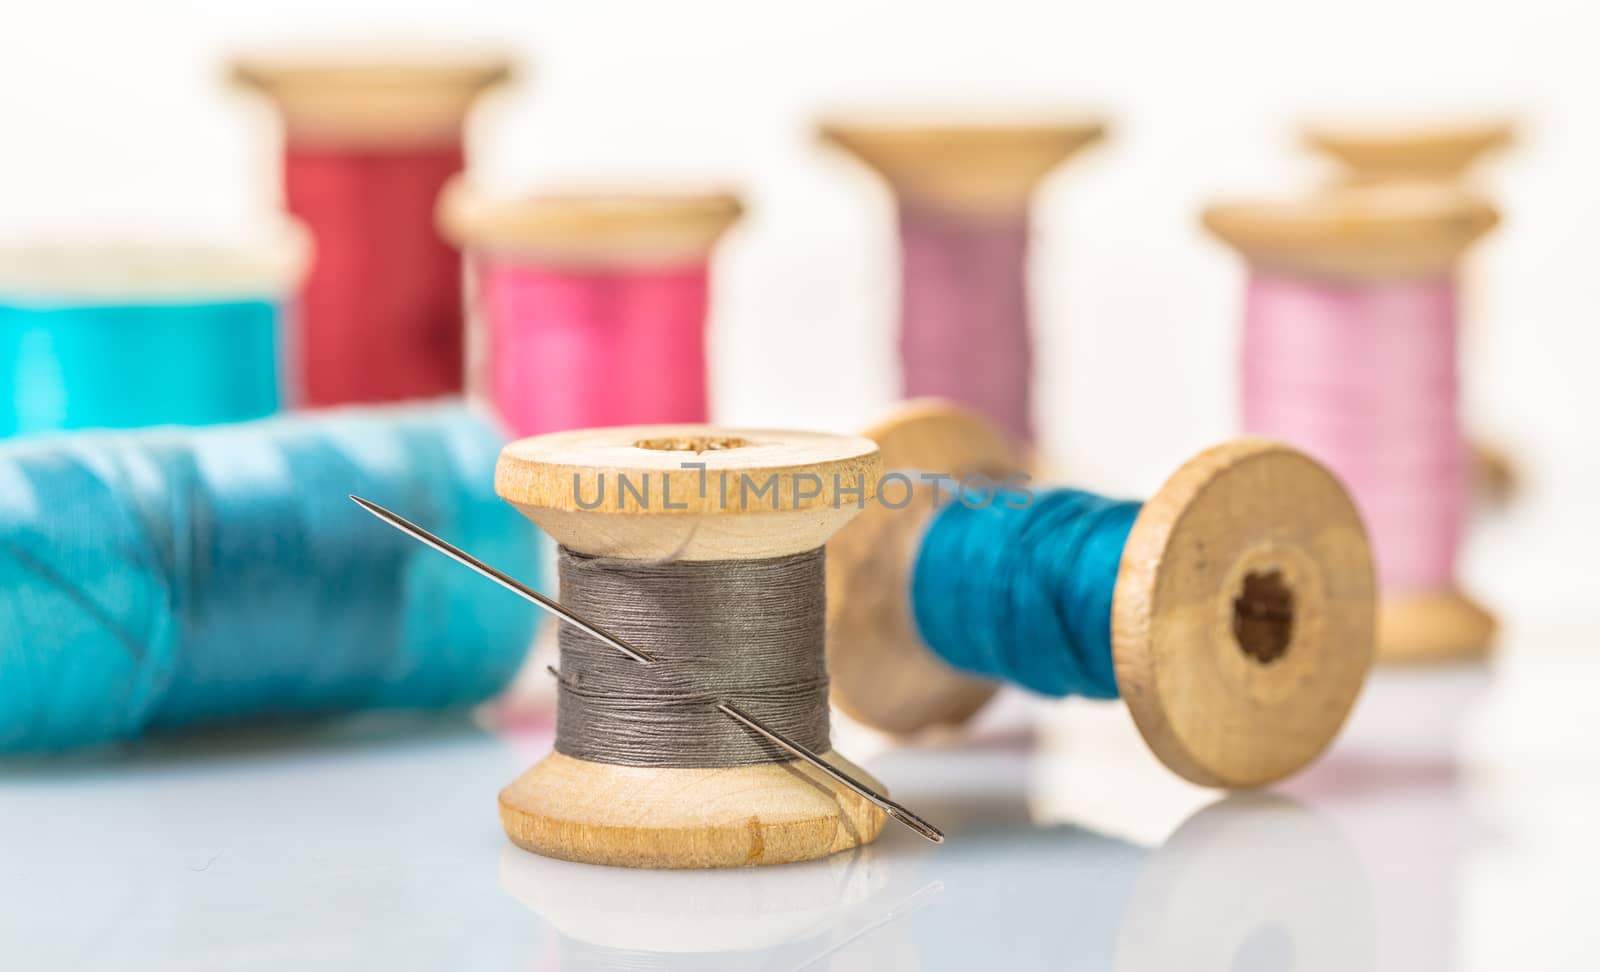 coils with colorful thread  by MegaArt